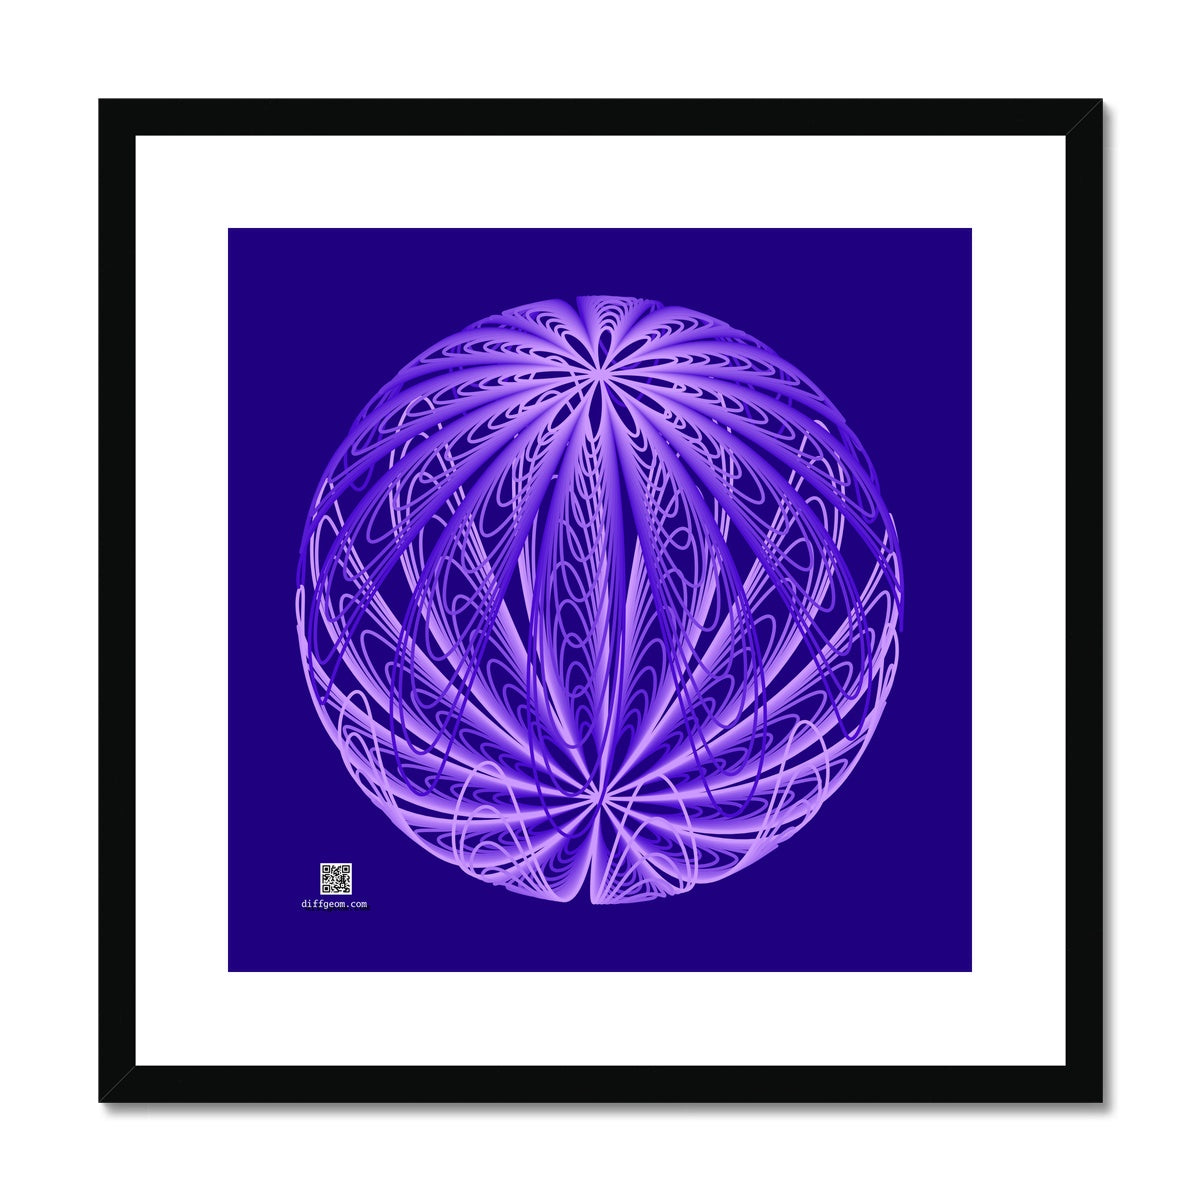 Dipole, Xray Sphere Framed & Mounted Print